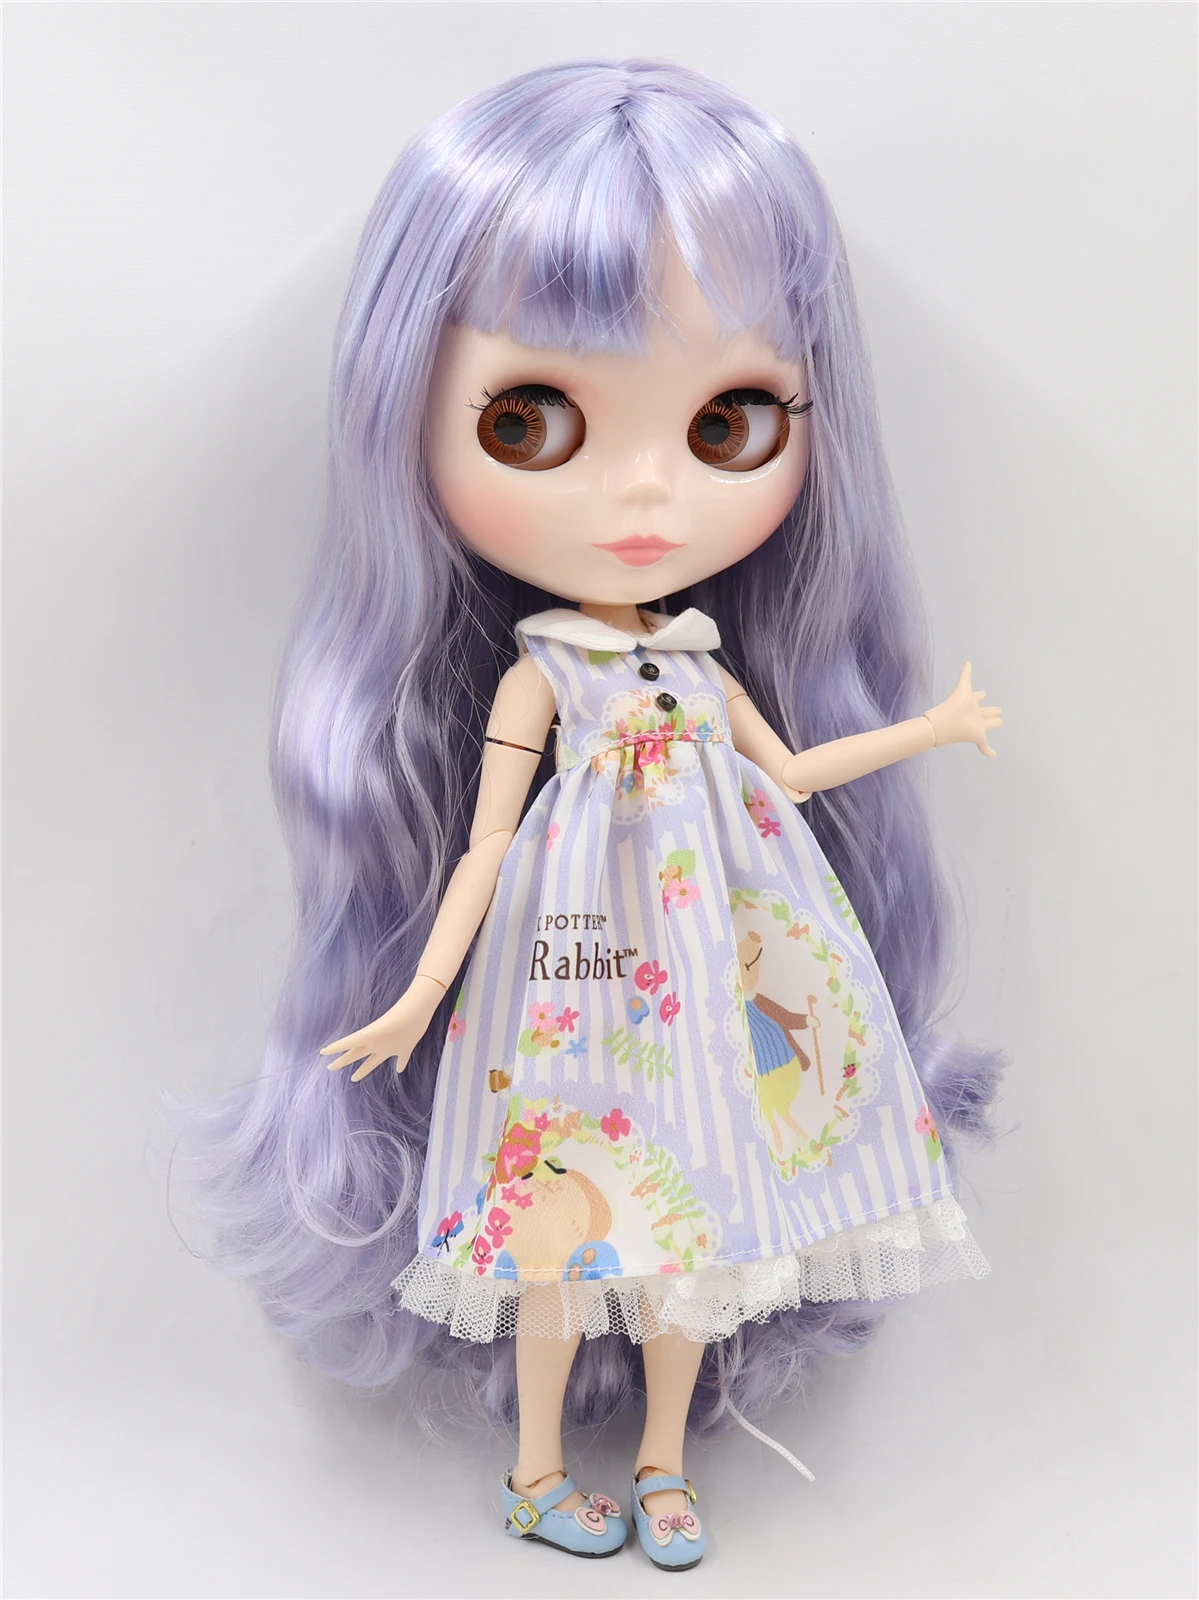 Neo Blythe Doll with Purple Hair, White Skin, Shiny Cute Face & Custom Jointed Body 1